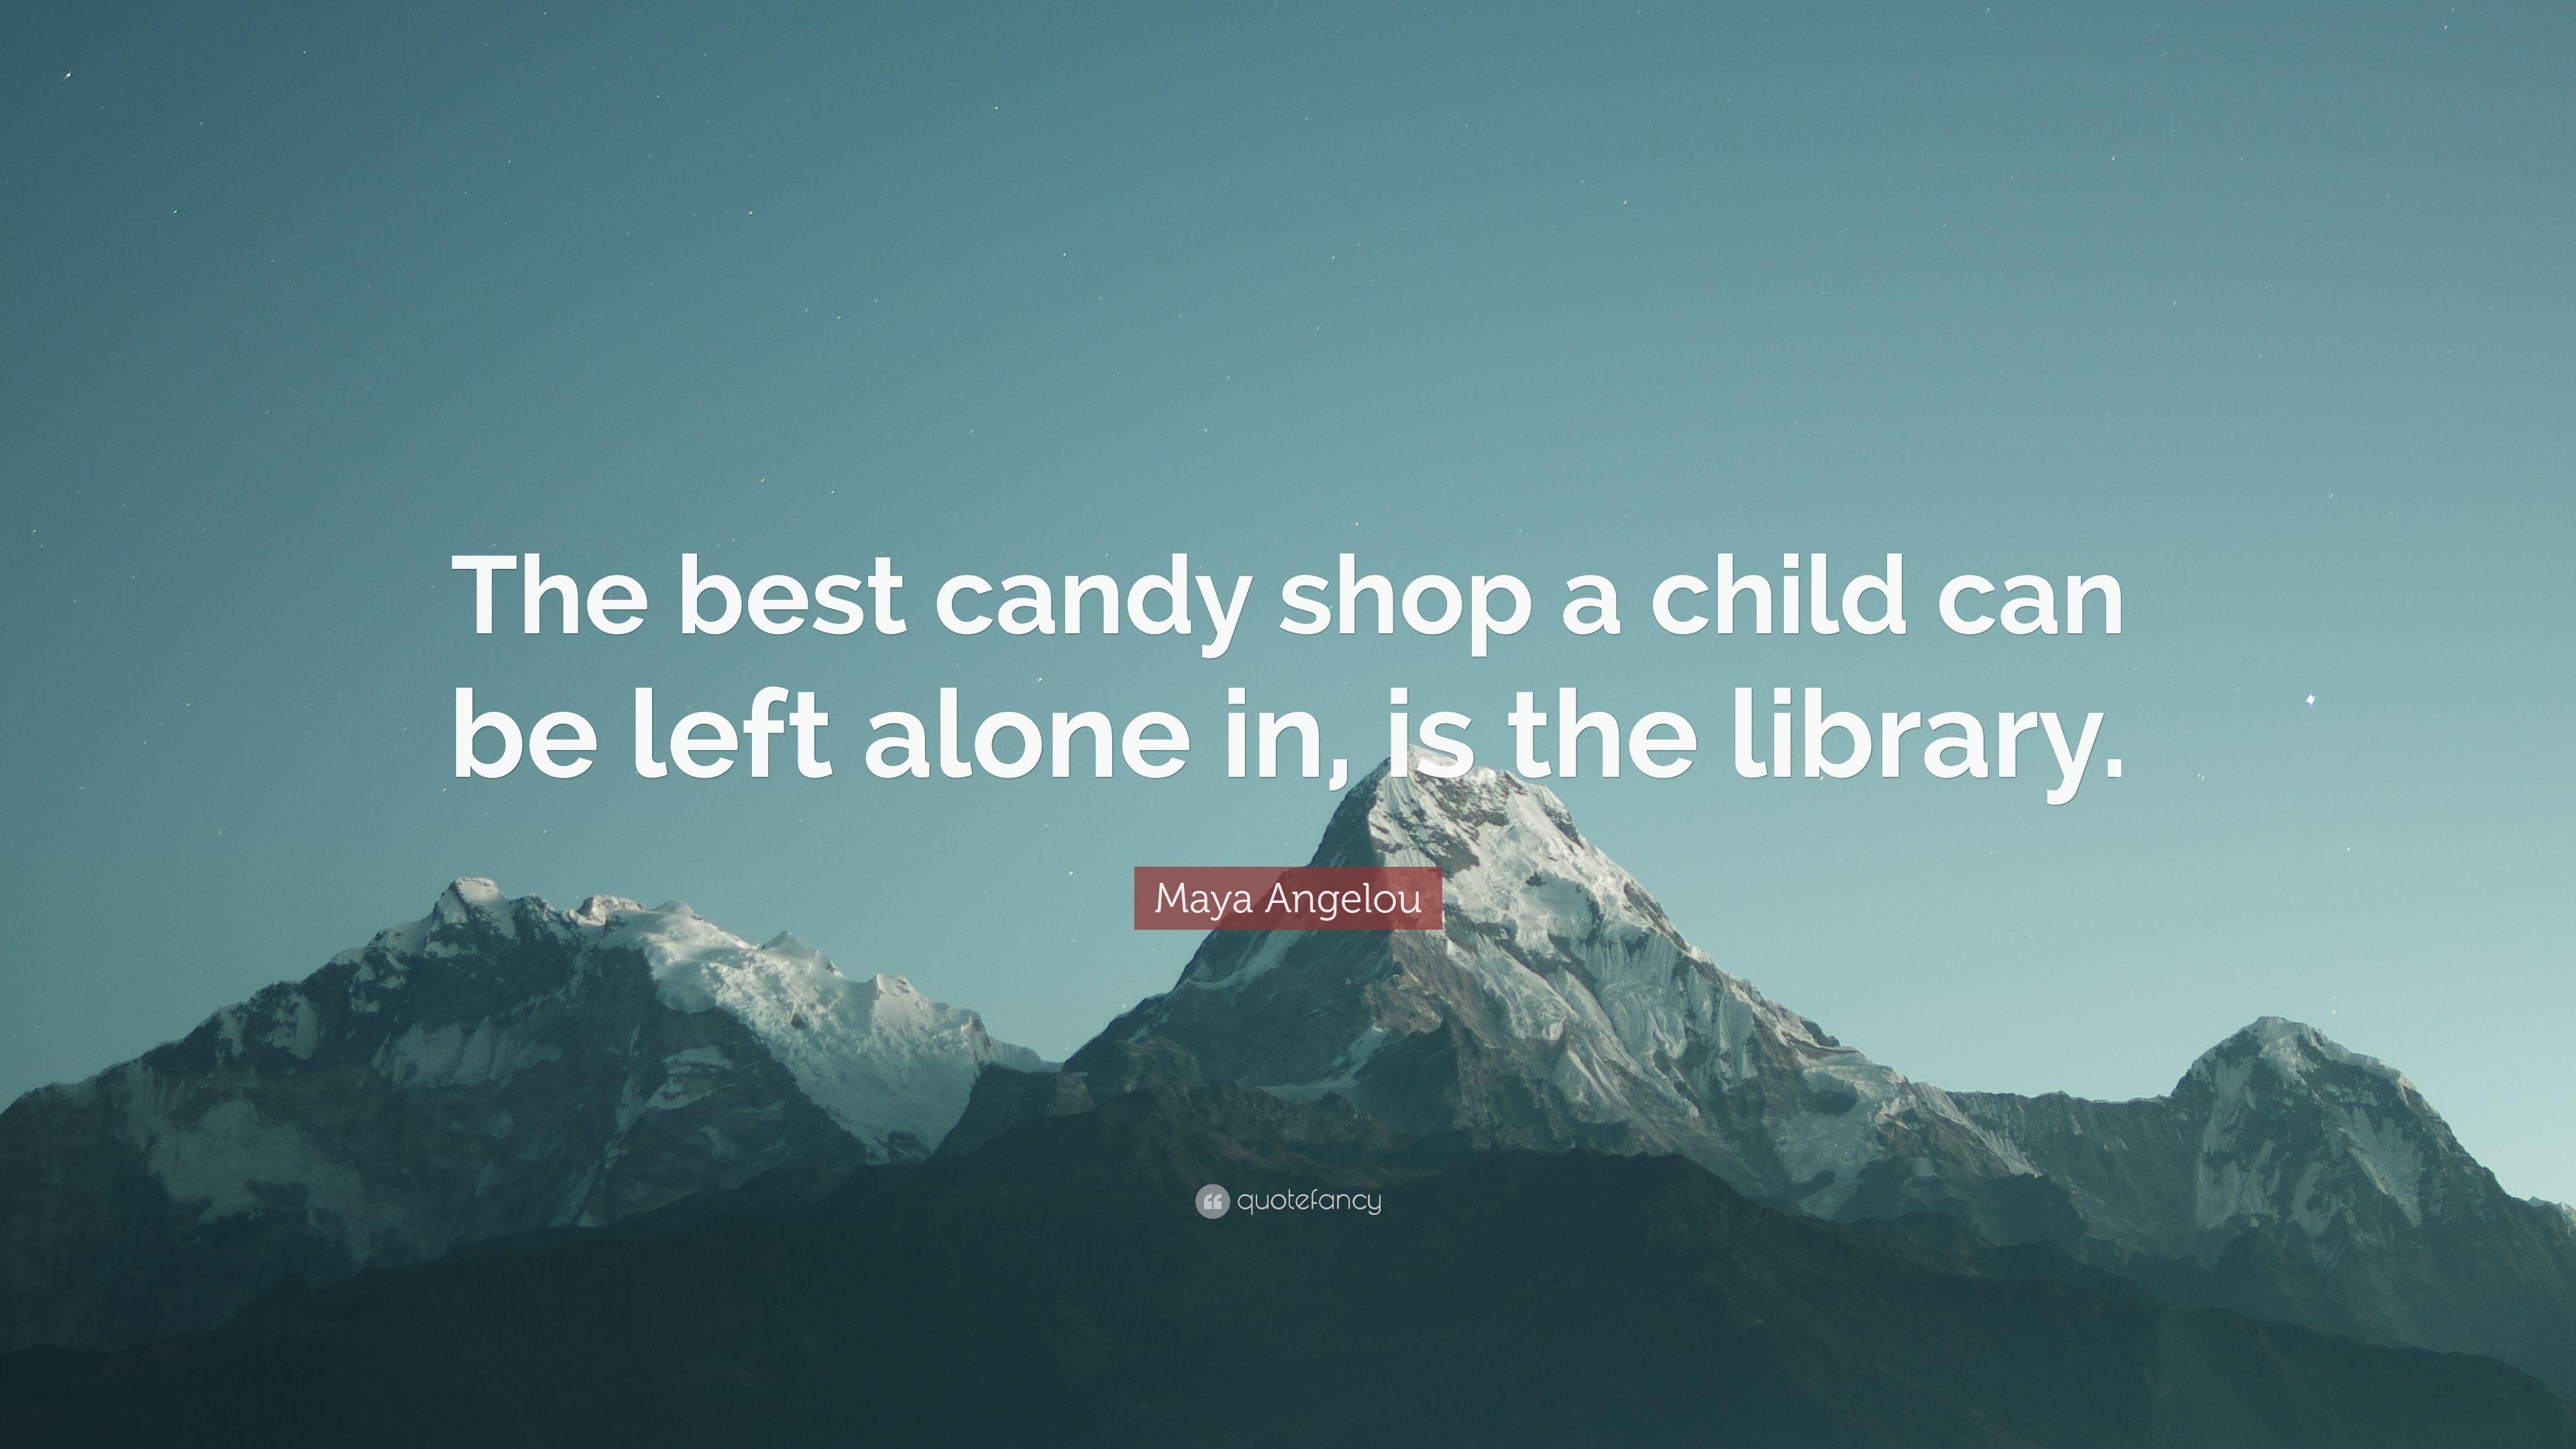 Maya Angelou Quote: “The best candy shop a child can be left alone